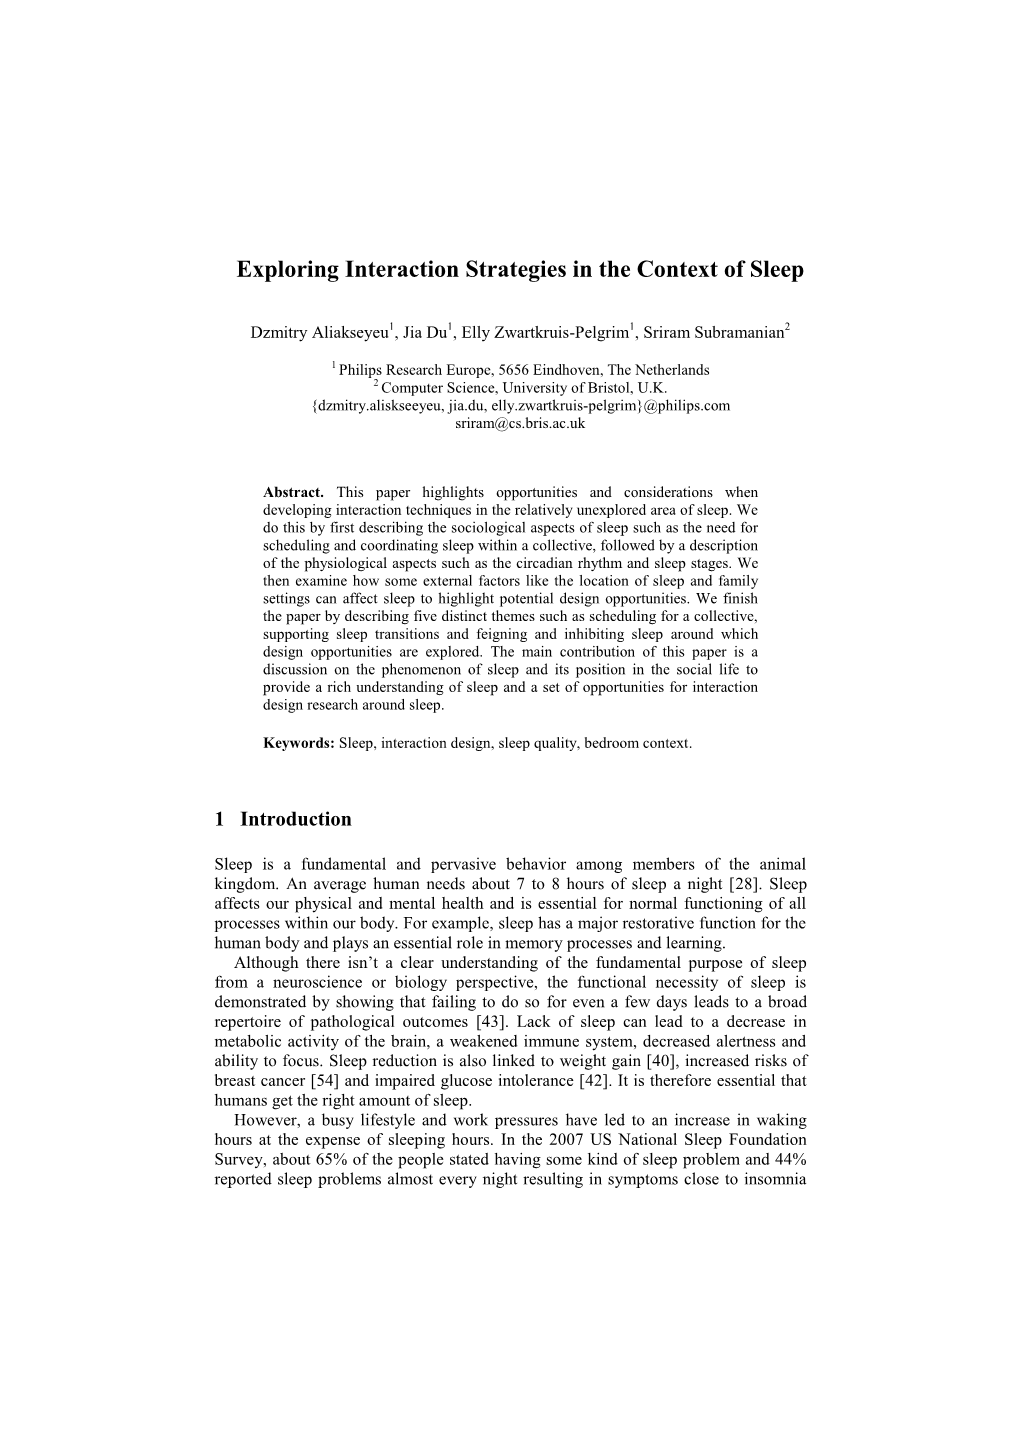 Exploring Interaction Strategies in the Context of Sleep